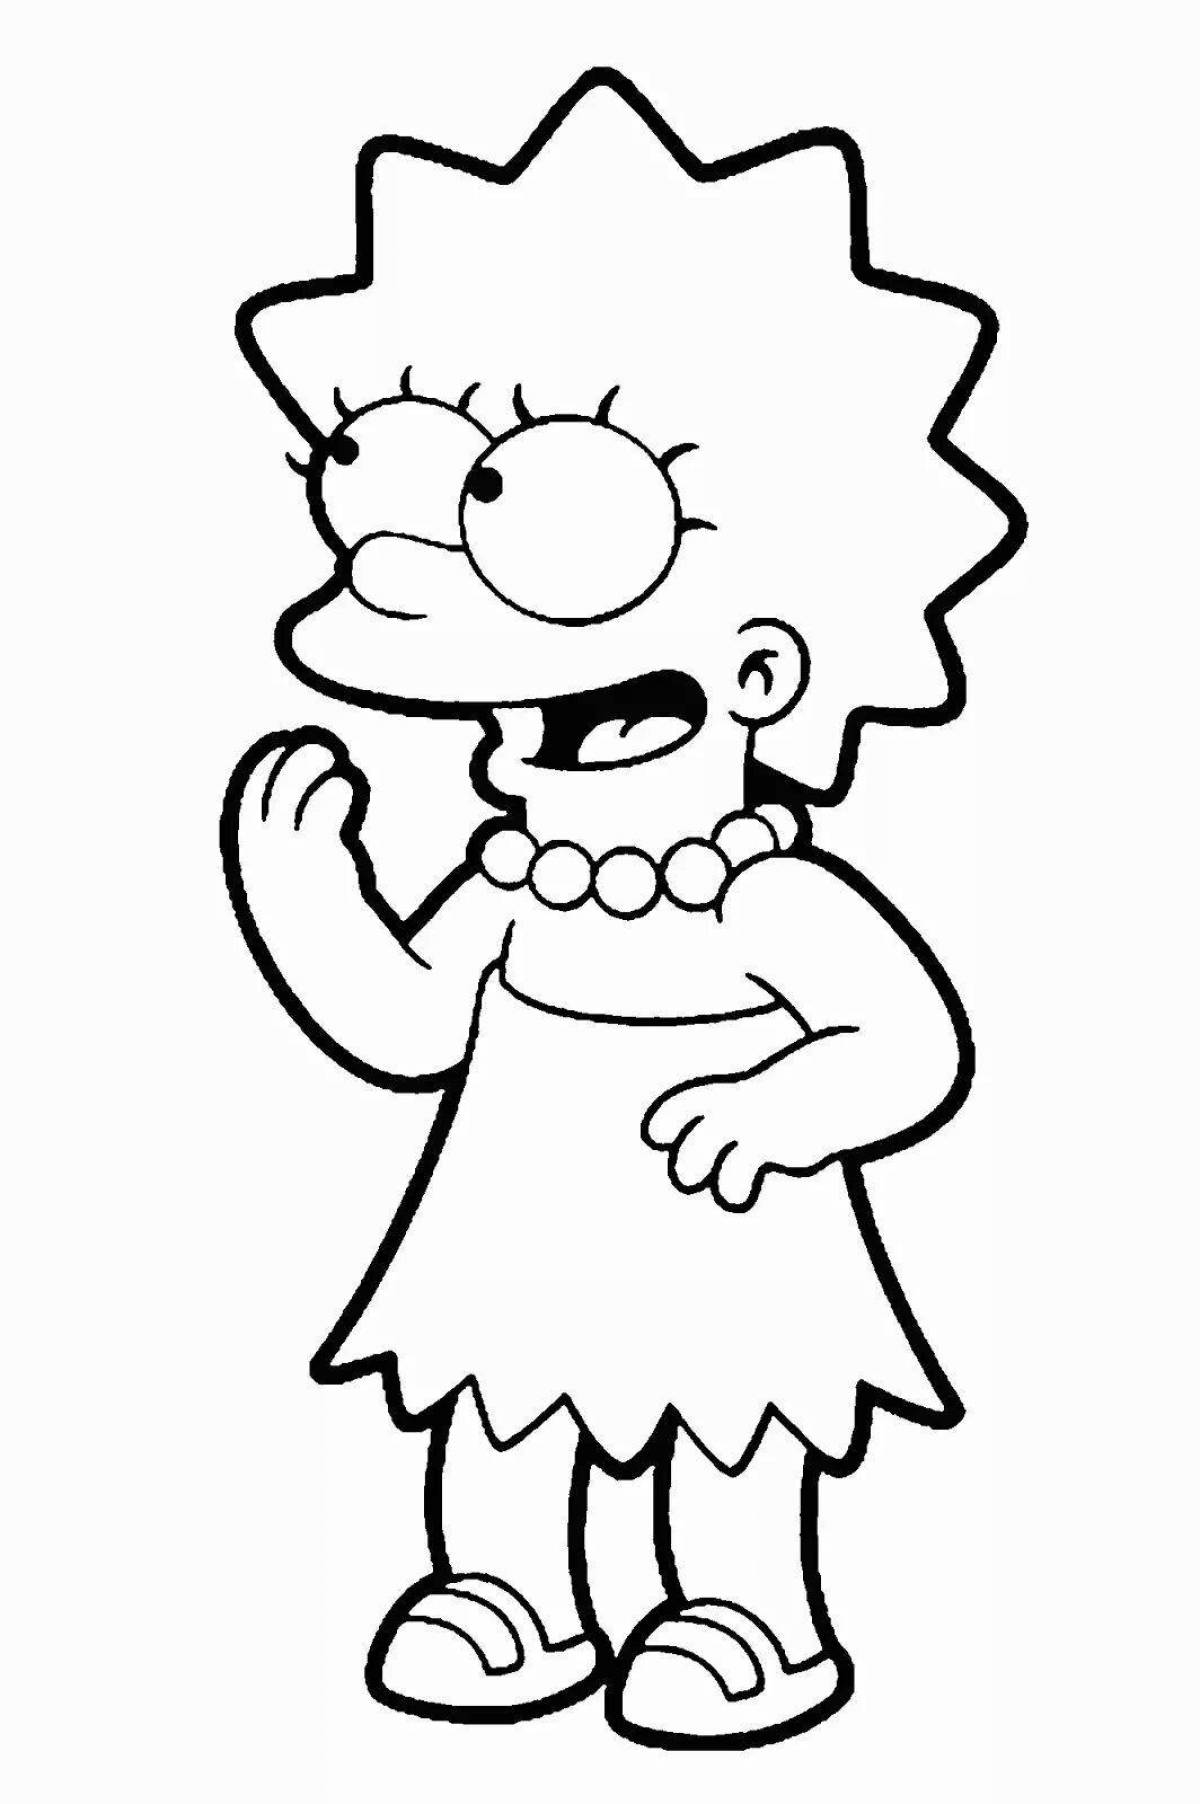 Lisa simpson's funny coloring book